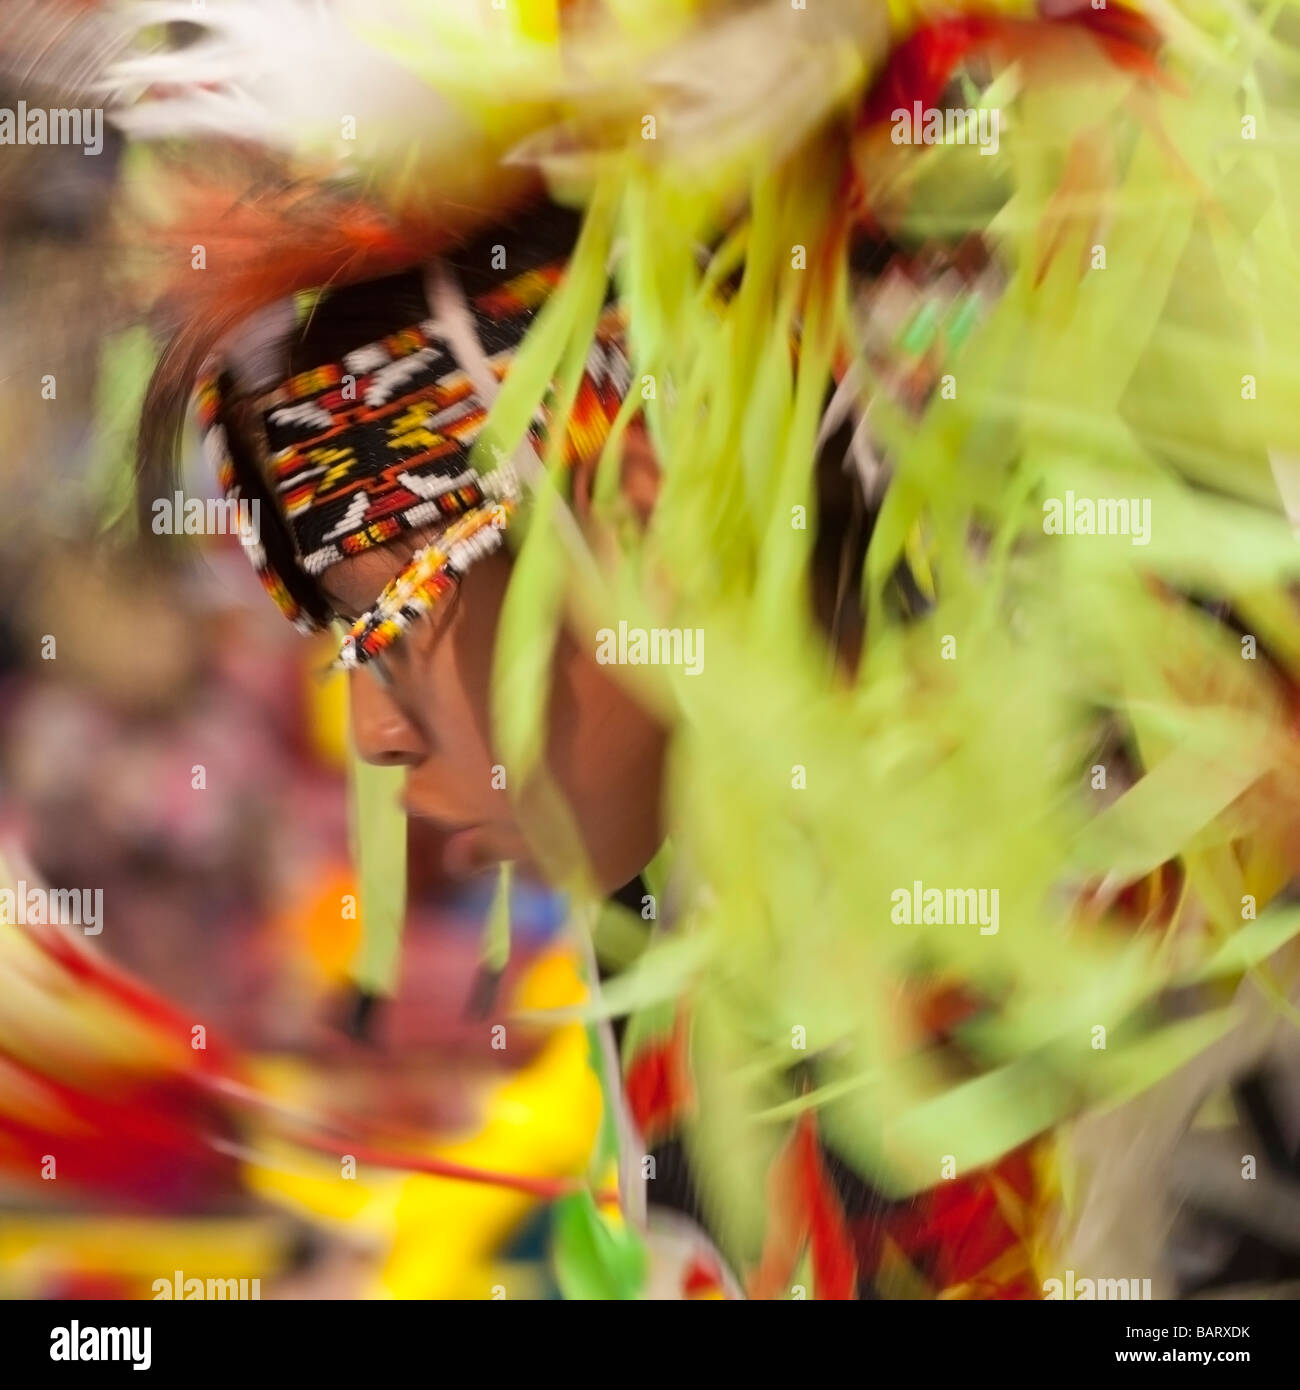 Powwow Dancer in Motion at the Gathering of Nations Powwow, Albuquerque, New Mexico Stock Photo